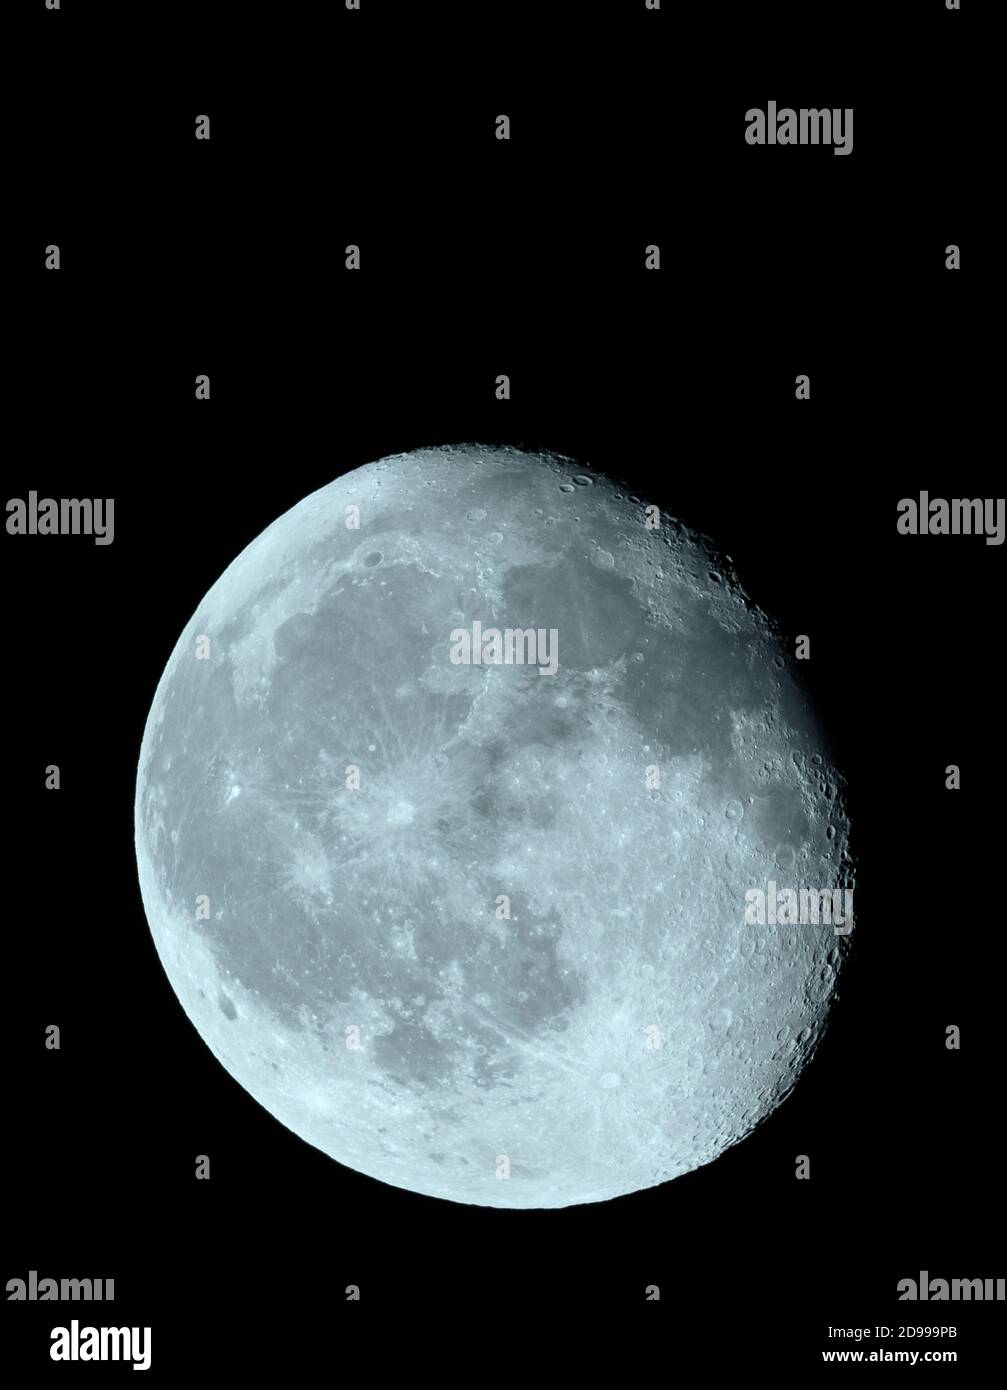 London, UK. 3 November 2020. 90.8% Waning Gibbous Moon with a heavily cratered terminator visible in clear overnight sky with possible ground frost tomorrow morning. Credit: Malcolm Park/Alamy Live News. Stock Photo